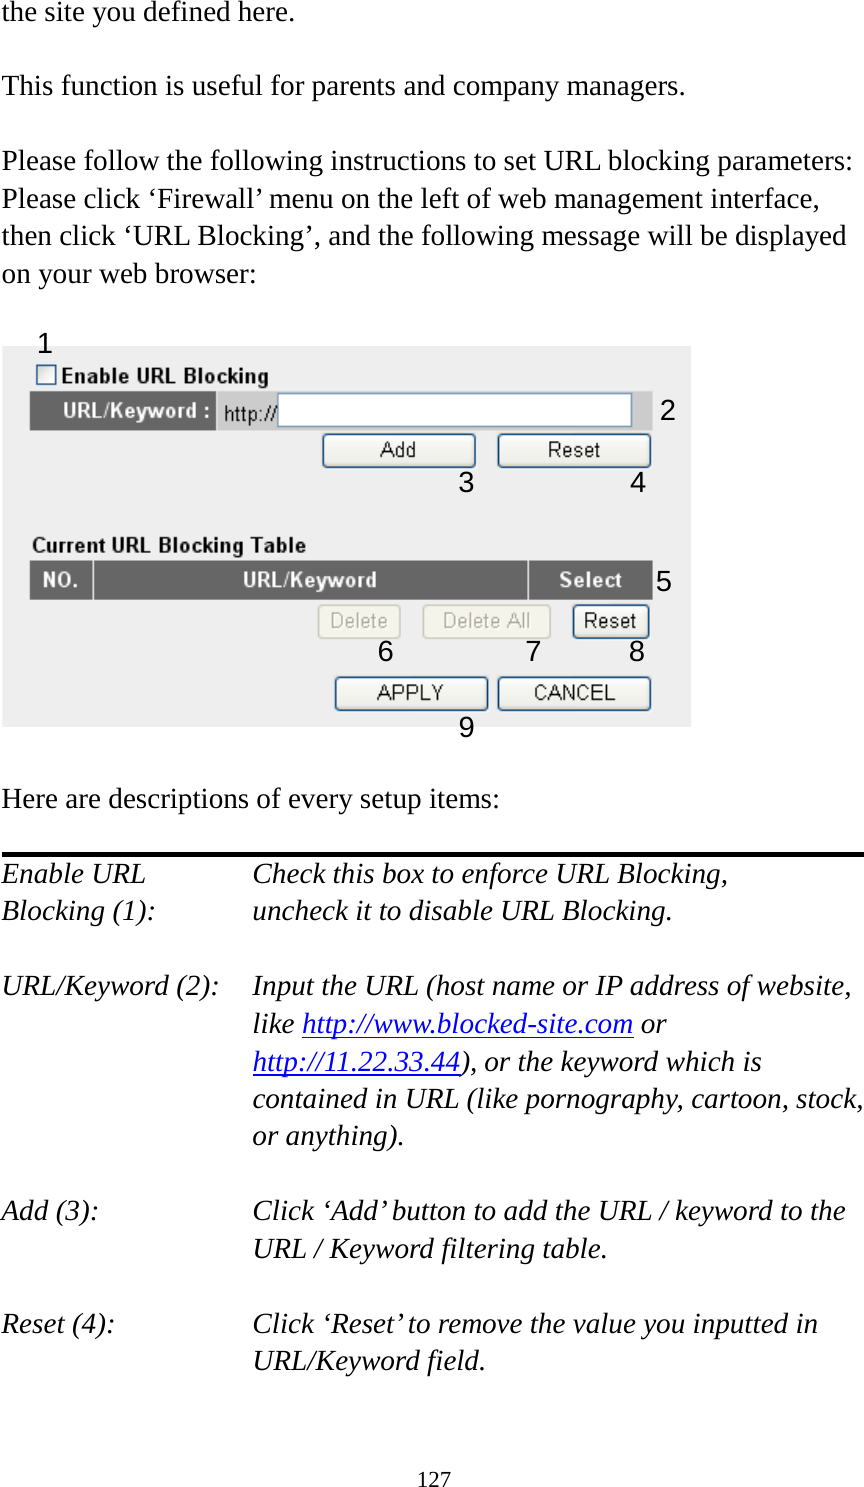 127 the site you defined here.  This function is useful for parents and company managers.  Please follow the following instructions to set URL blocking parameters: Please click ‘Firewall’ menu on the left of web management interface, then click ‘URL Blocking’, and the following message will be displayed on your web browser:    Here are descriptions of every setup items:  Enable URL      Check this box to enforce URL Blocking, Blocking (1):      uncheck it to disable URL Blocking.  URL/Keyword (2):   Input the URL (host name or IP address of website, like http://www.blocked-site.com or http://11.22.33.44), or the keyword which is contained in URL (like pornography, cartoon, stock, or anything).  Add (3):   Click ‘Add’ button to add the URL / keyword to the URL / Keyword filtering table.  Reset (4):   Click ‘Reset’ to remove the value you inputted in URL/Keyword field.  2 3  4 5 6  7  8 9 1 